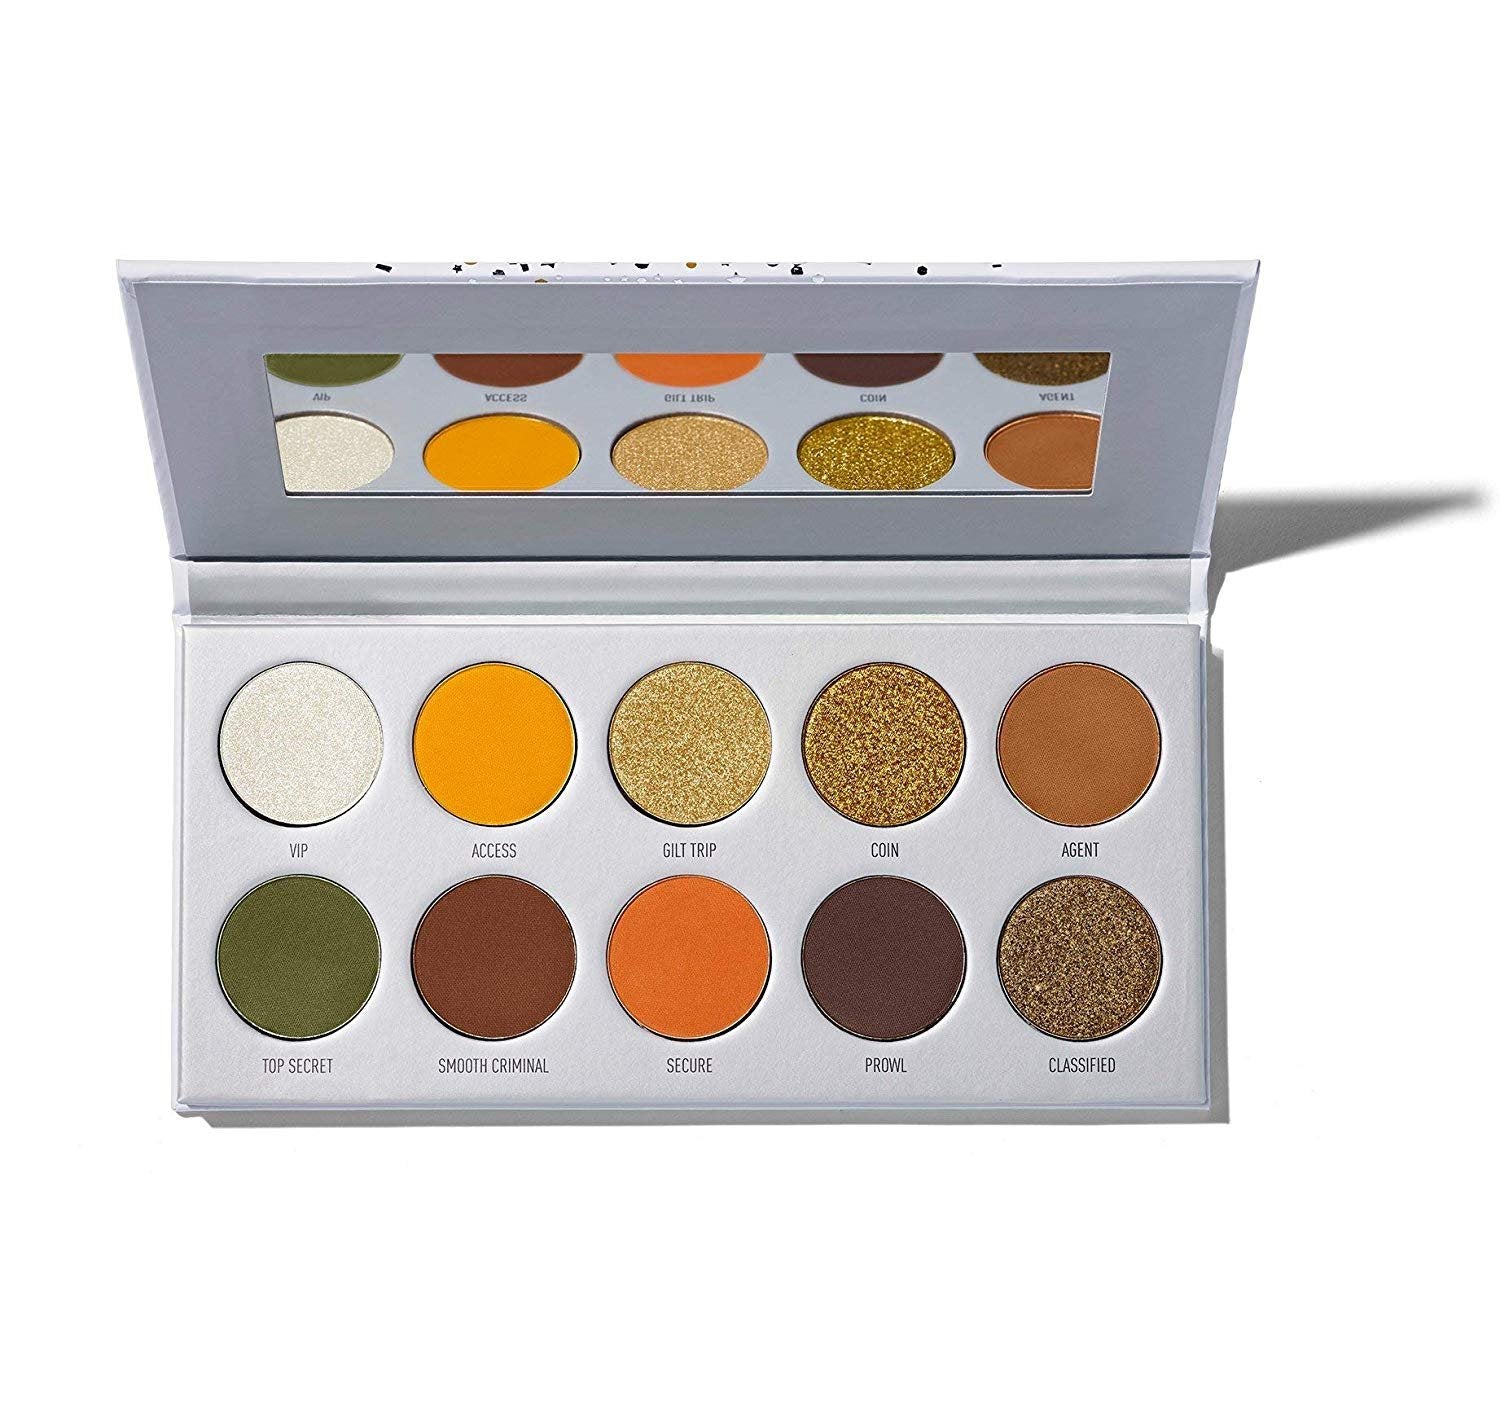 M Morphe x Jaclyn Hill The Vault Armed & Gorgeous Eyeshadow Palette